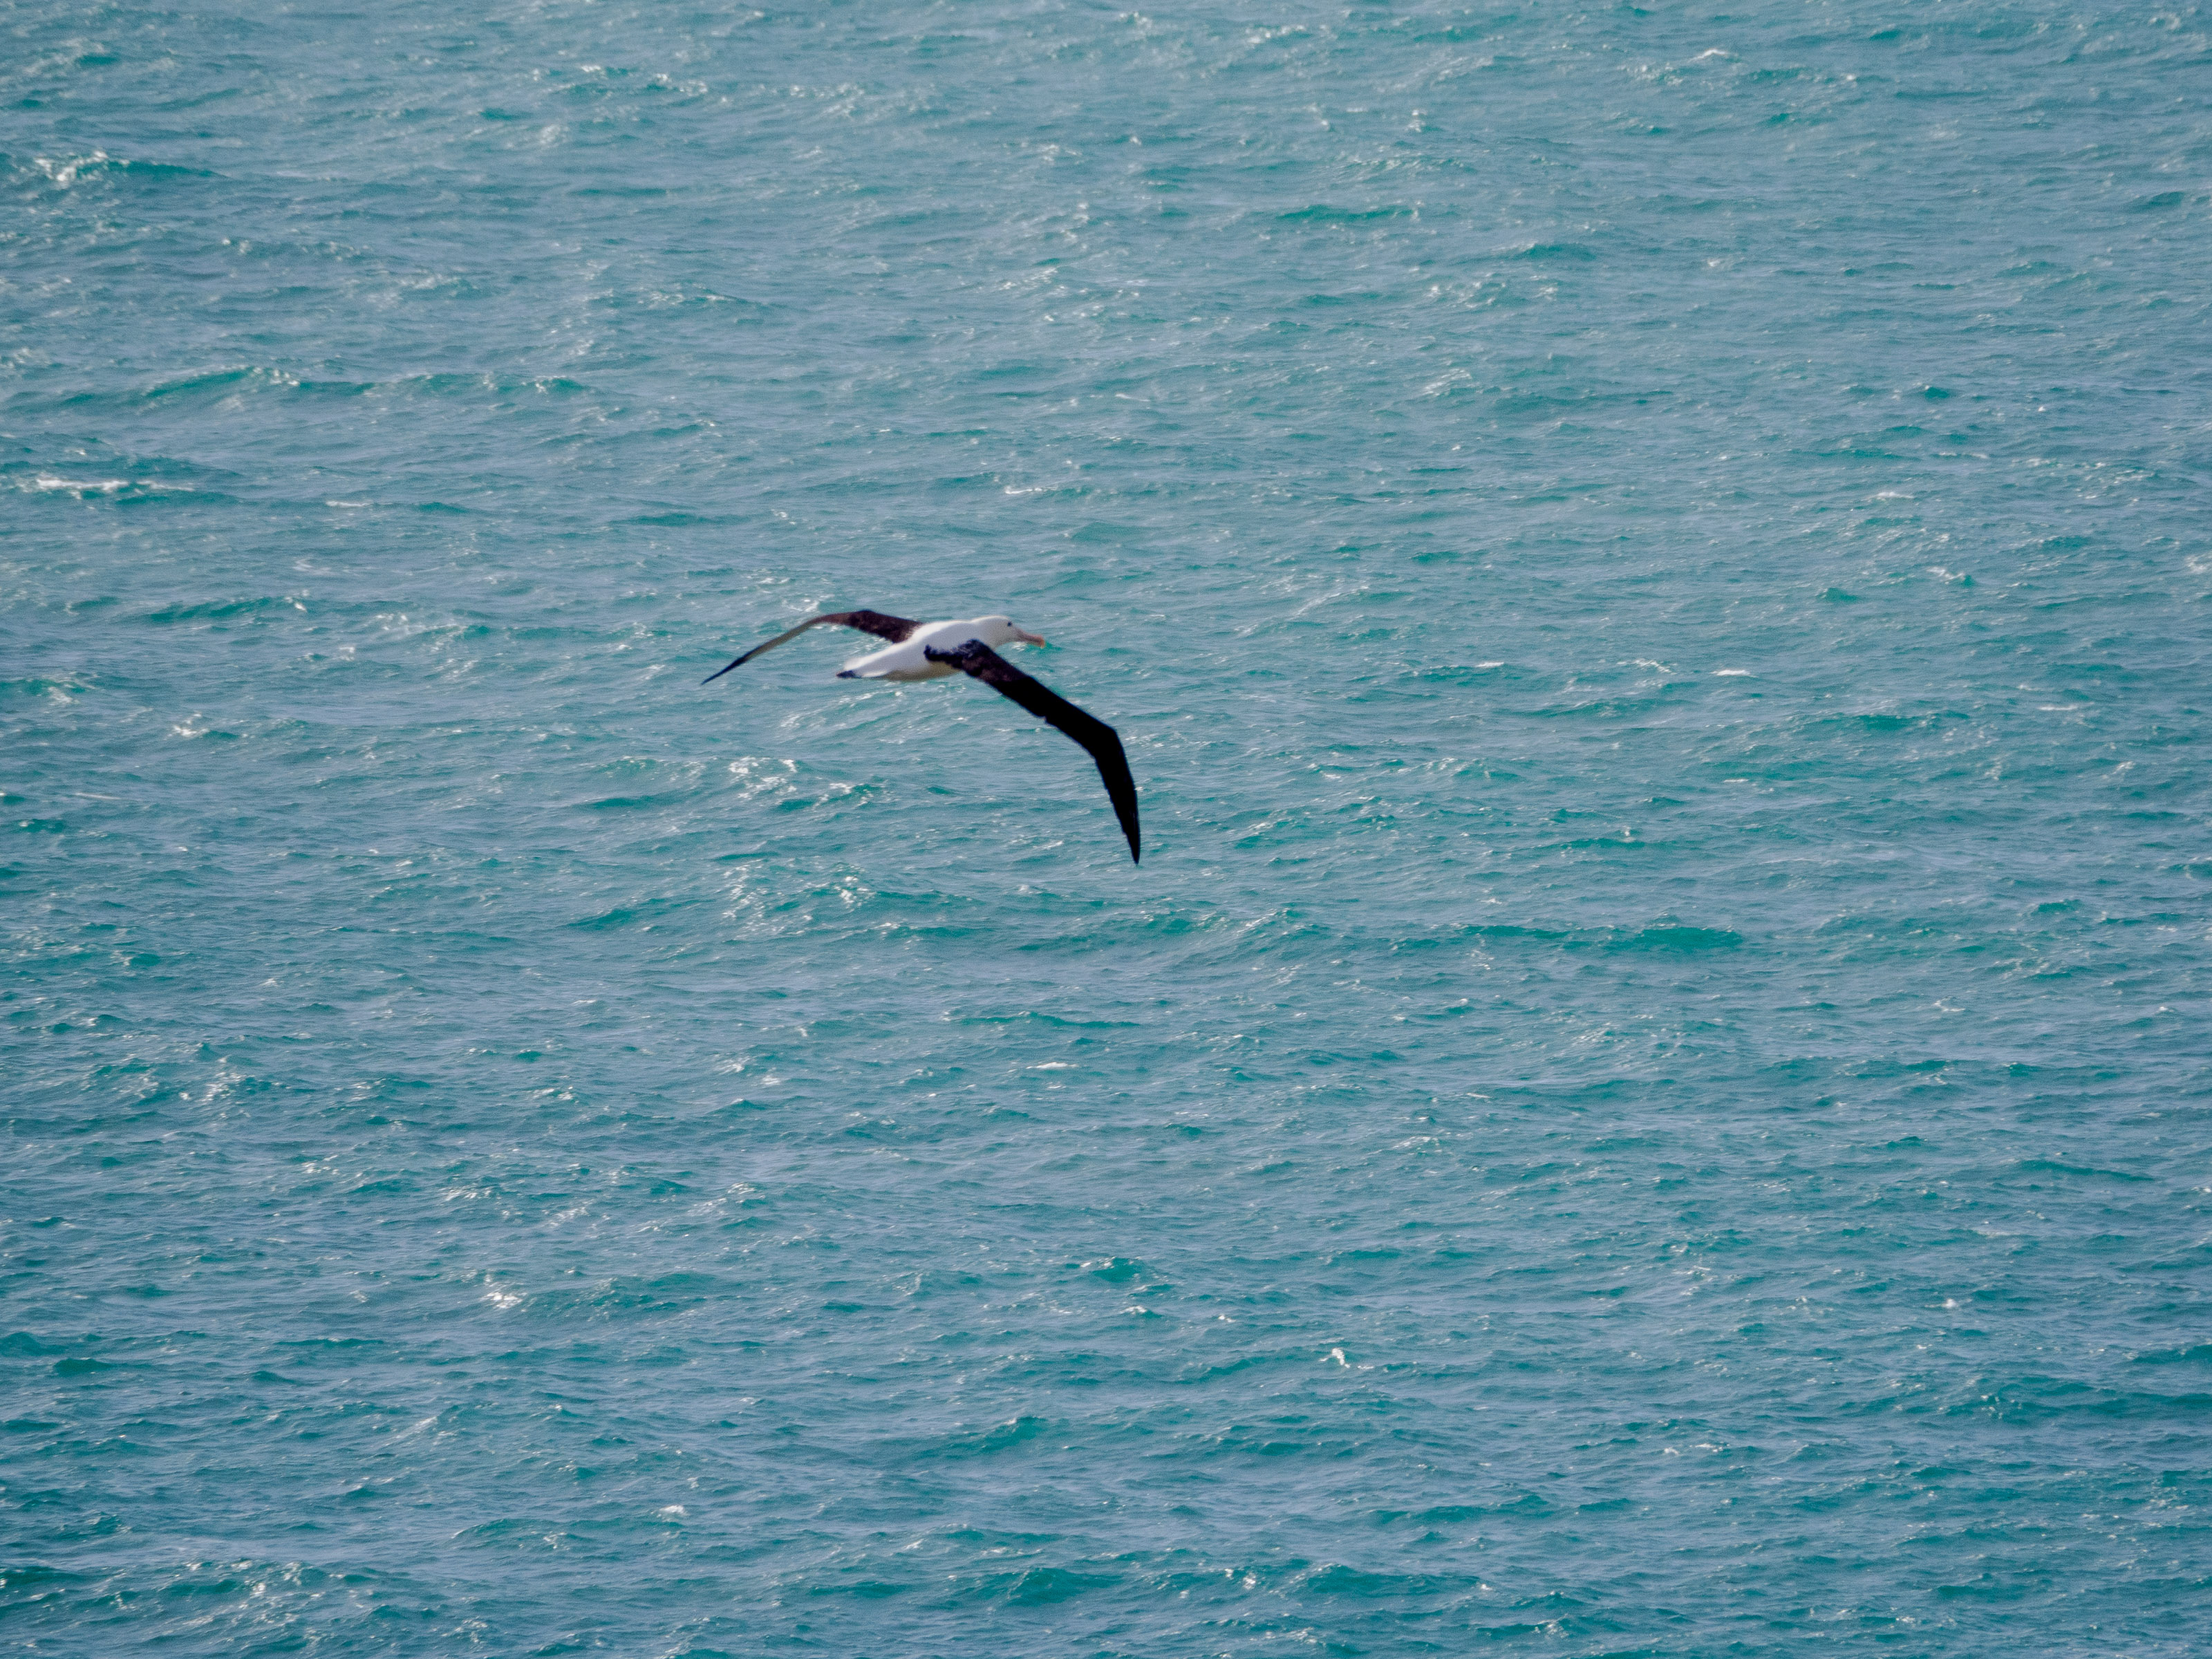 Royal albatross gliding with black wings outstretched over water background